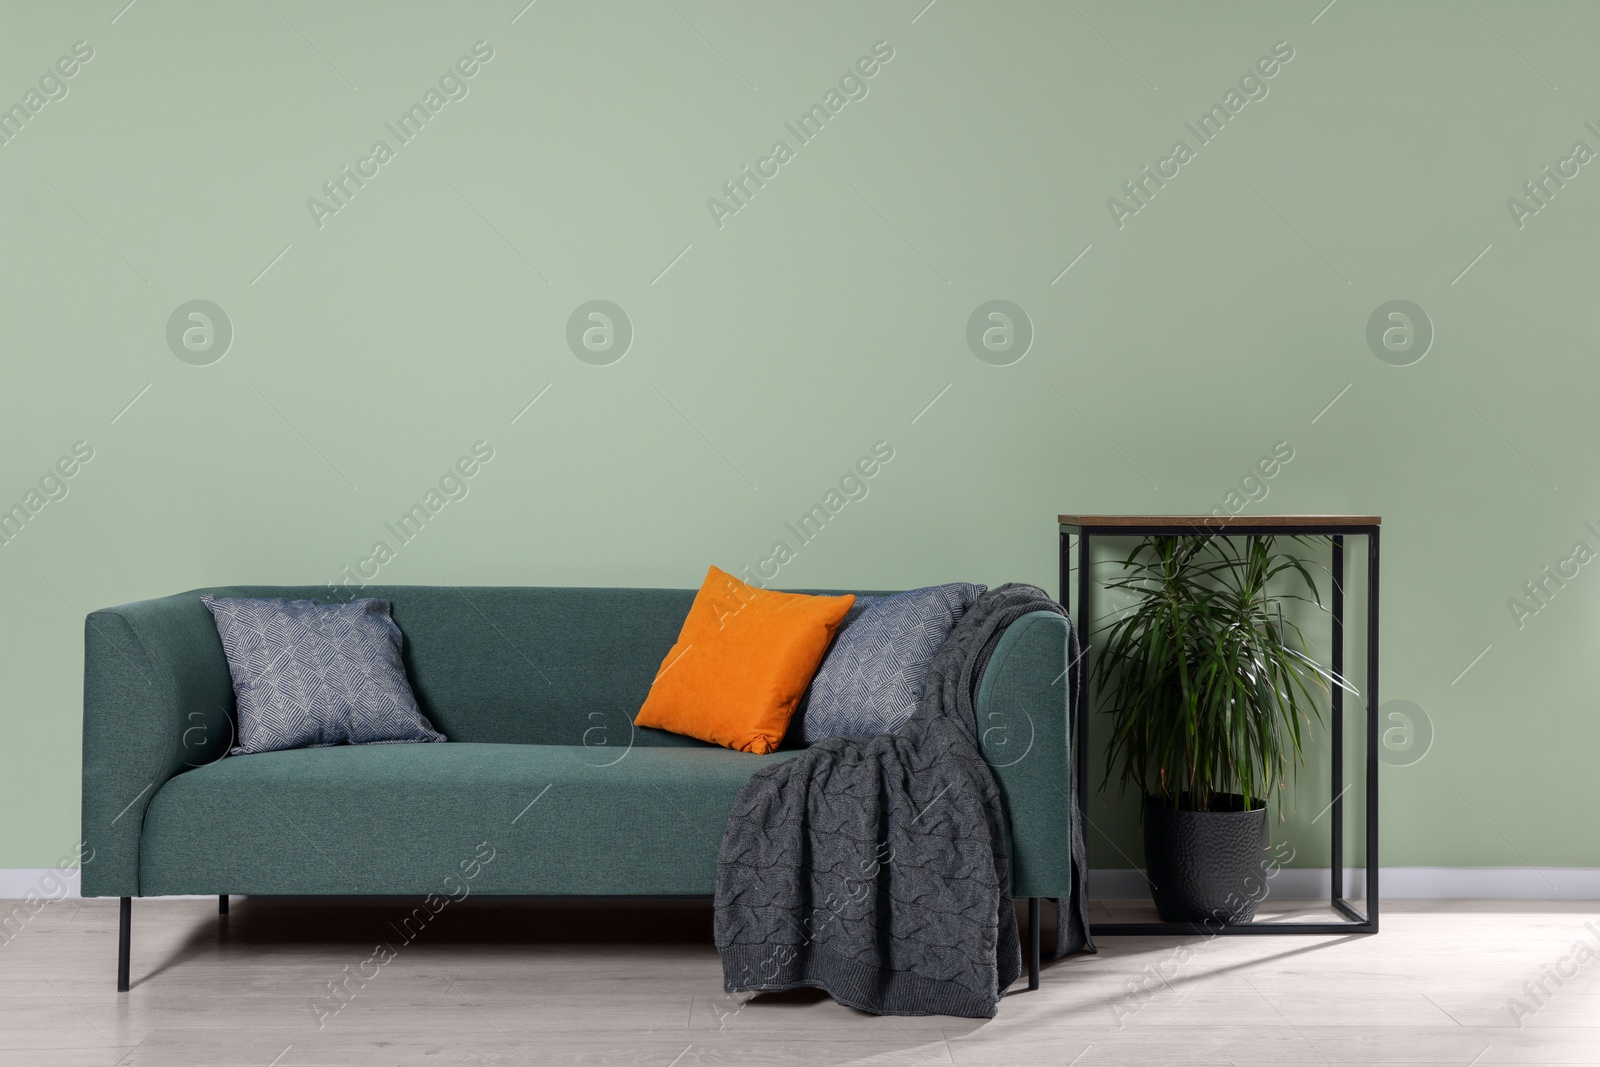 Photo of Comfortable sofa with cushions and blanket near console table indoors. Interior design